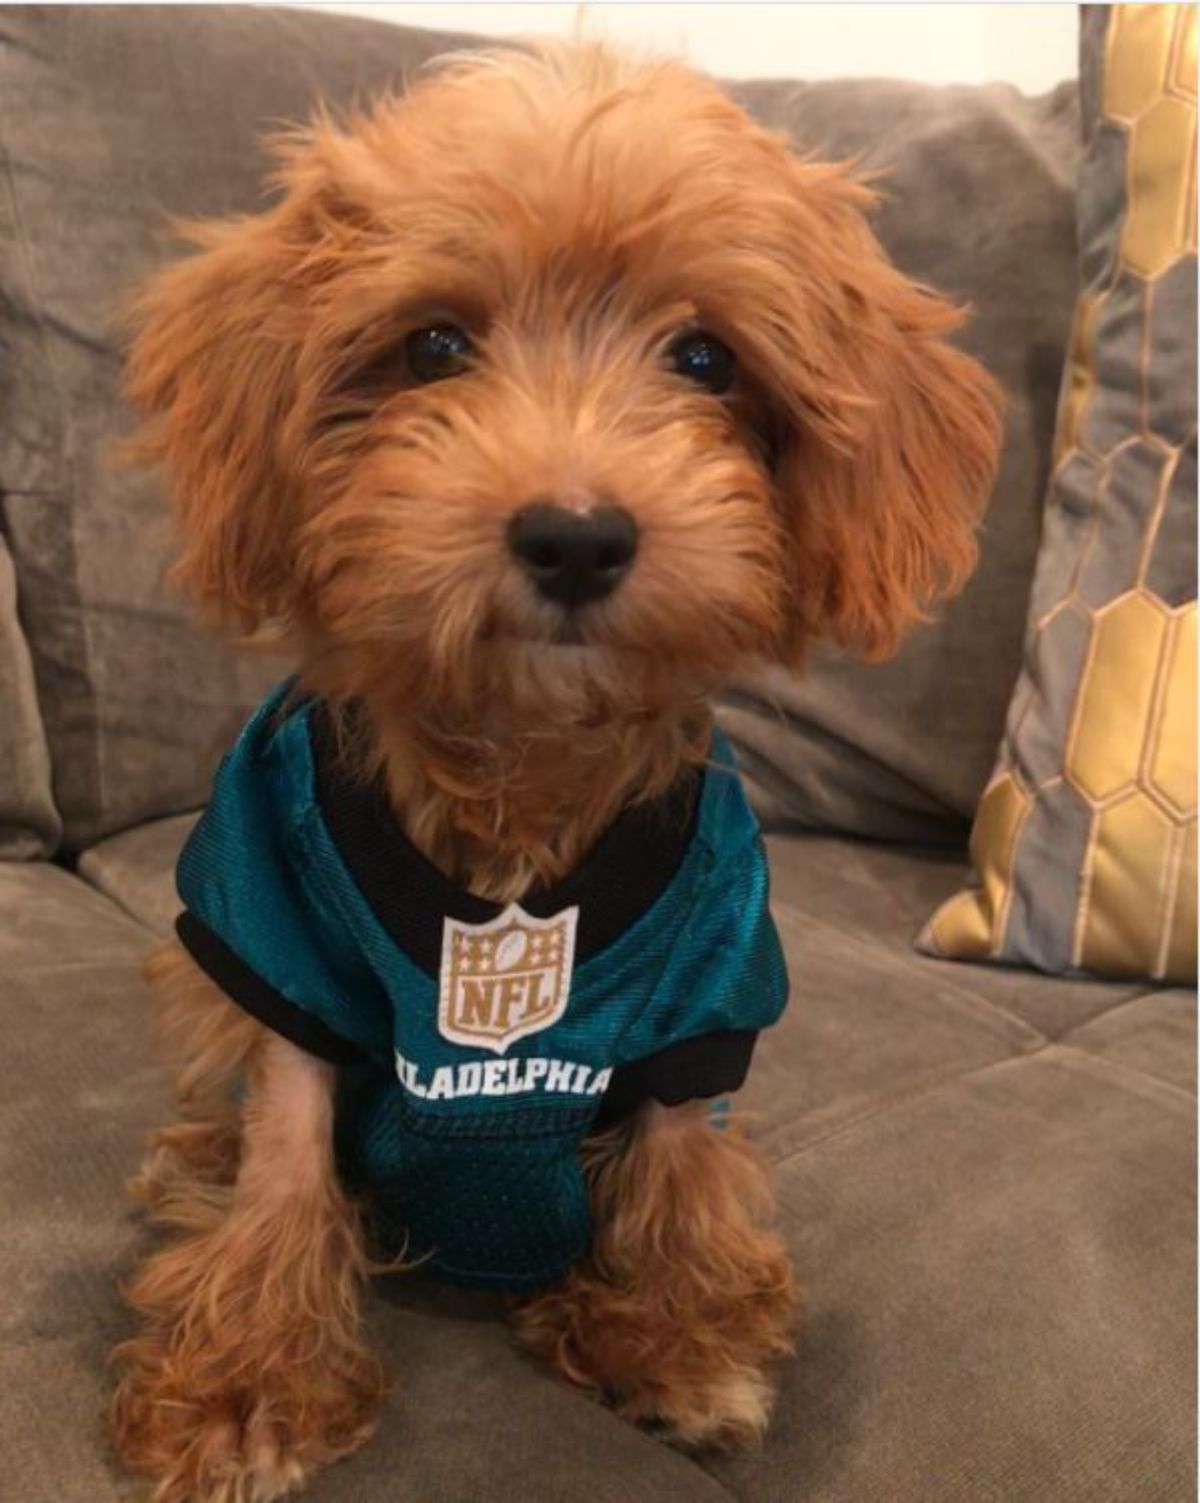 cute godlen yorkiepoo puppy wearing a blue t-shirt while sitting on the couch